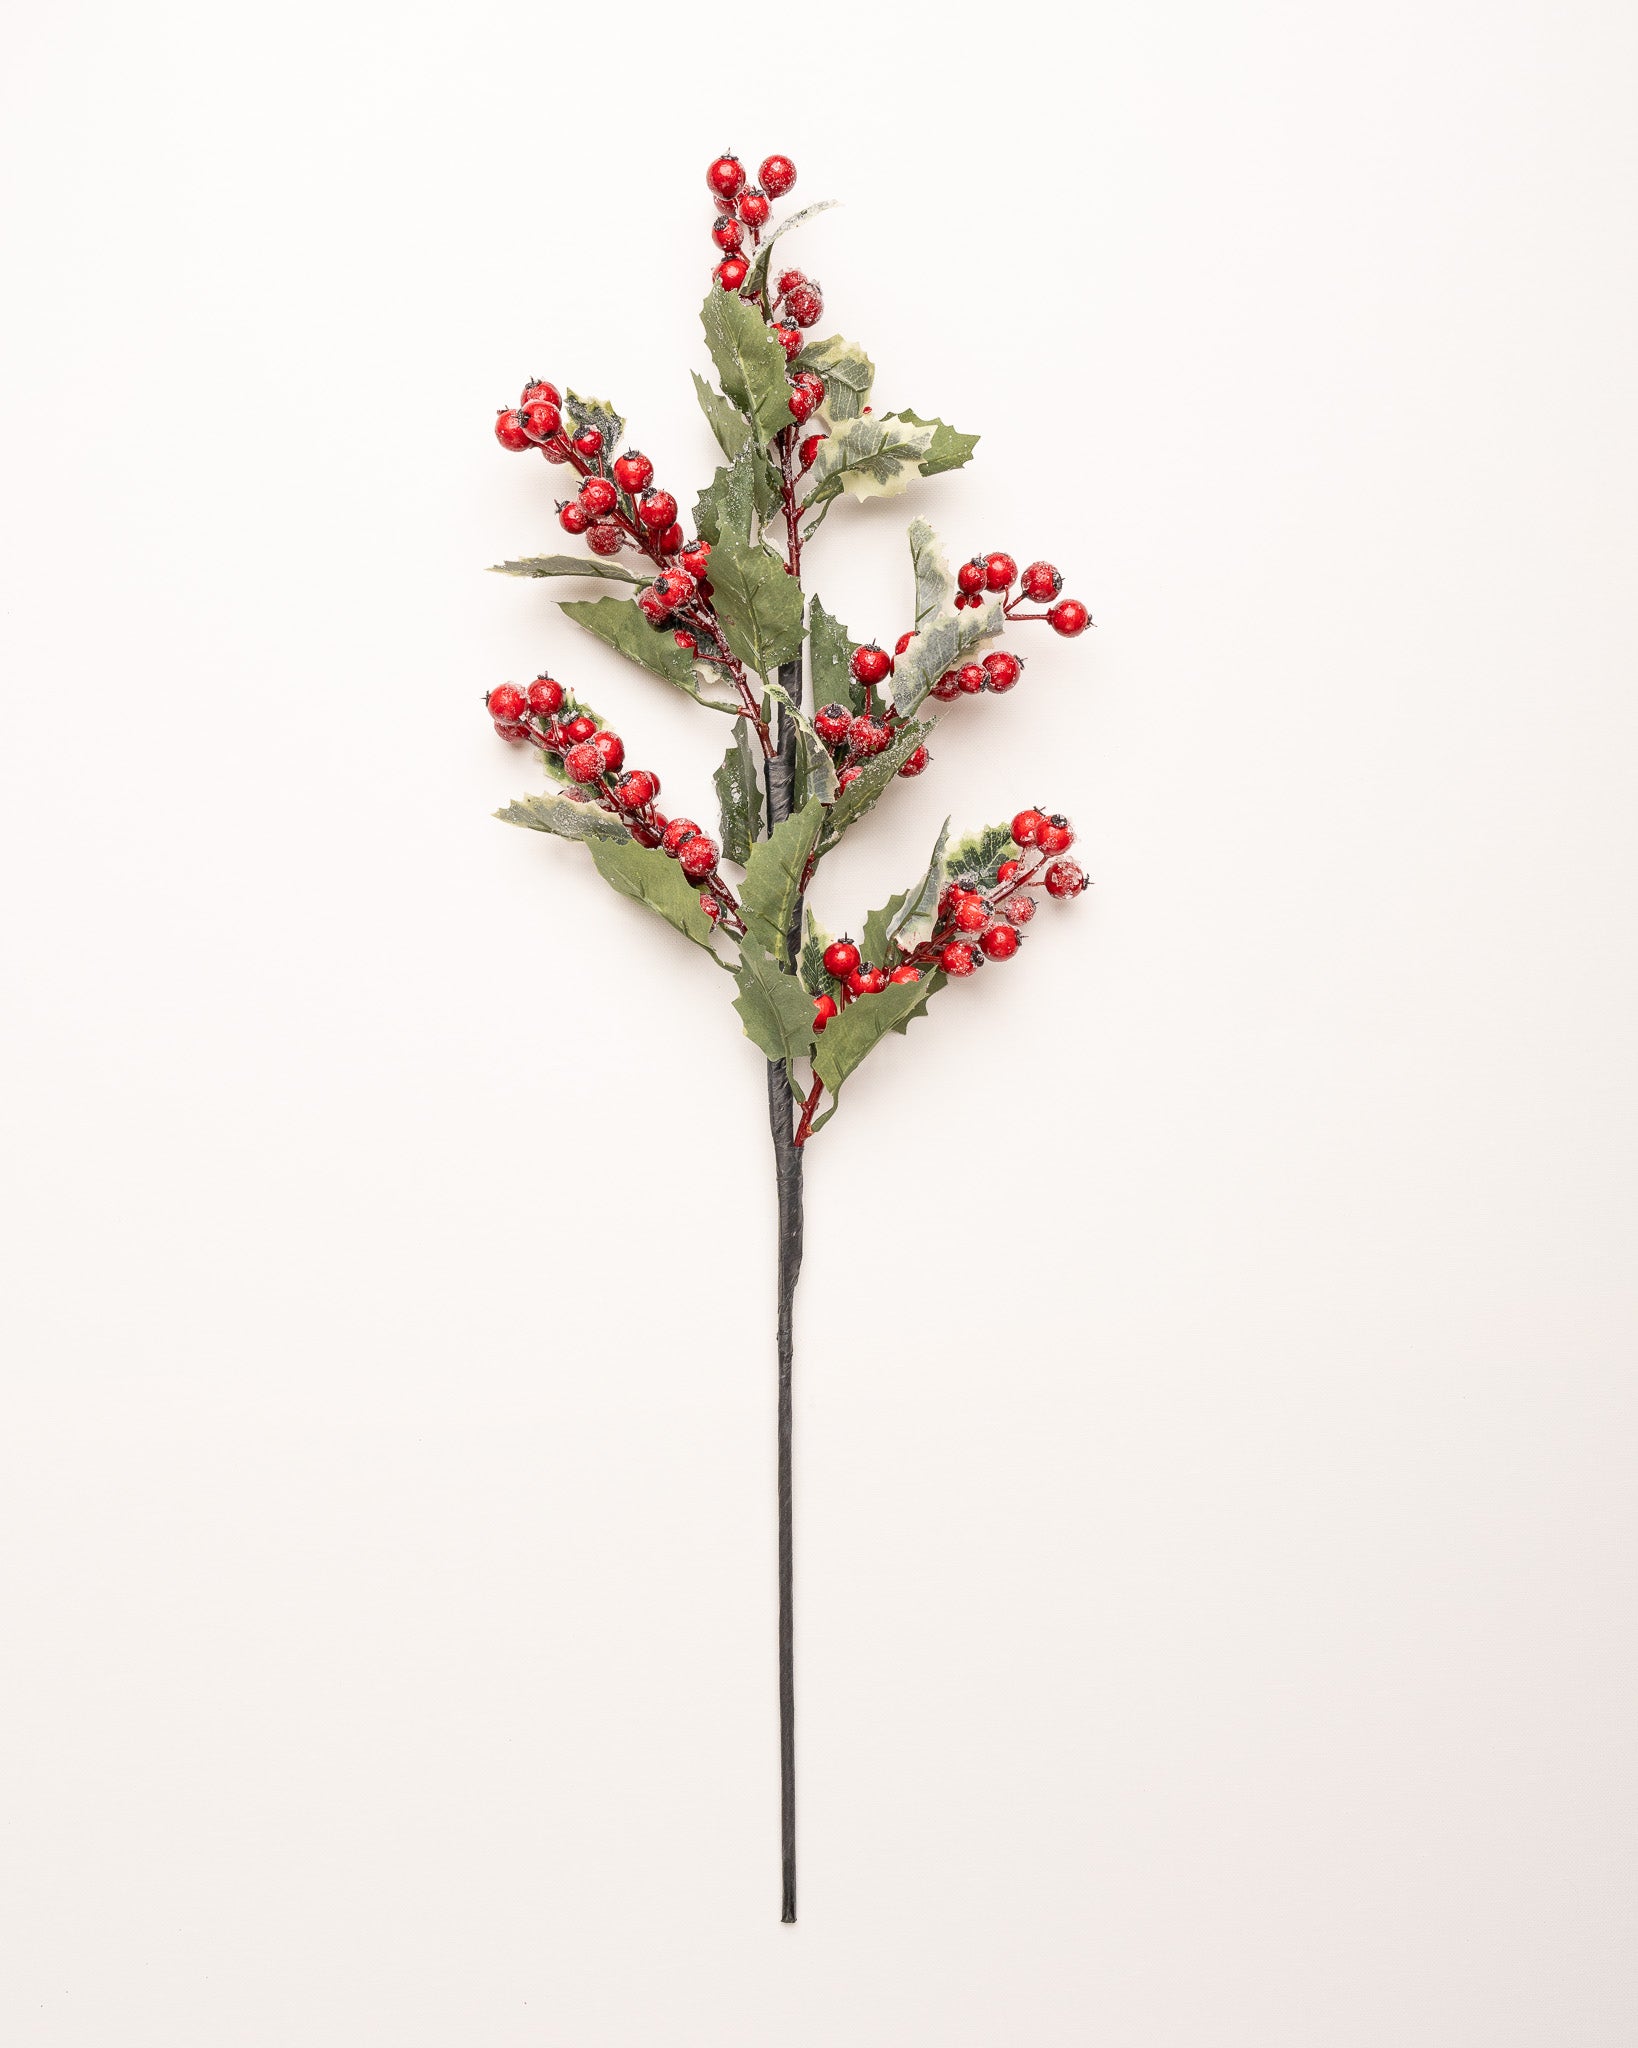 Holly Branches With Red Berries Set For Decoration Traditional